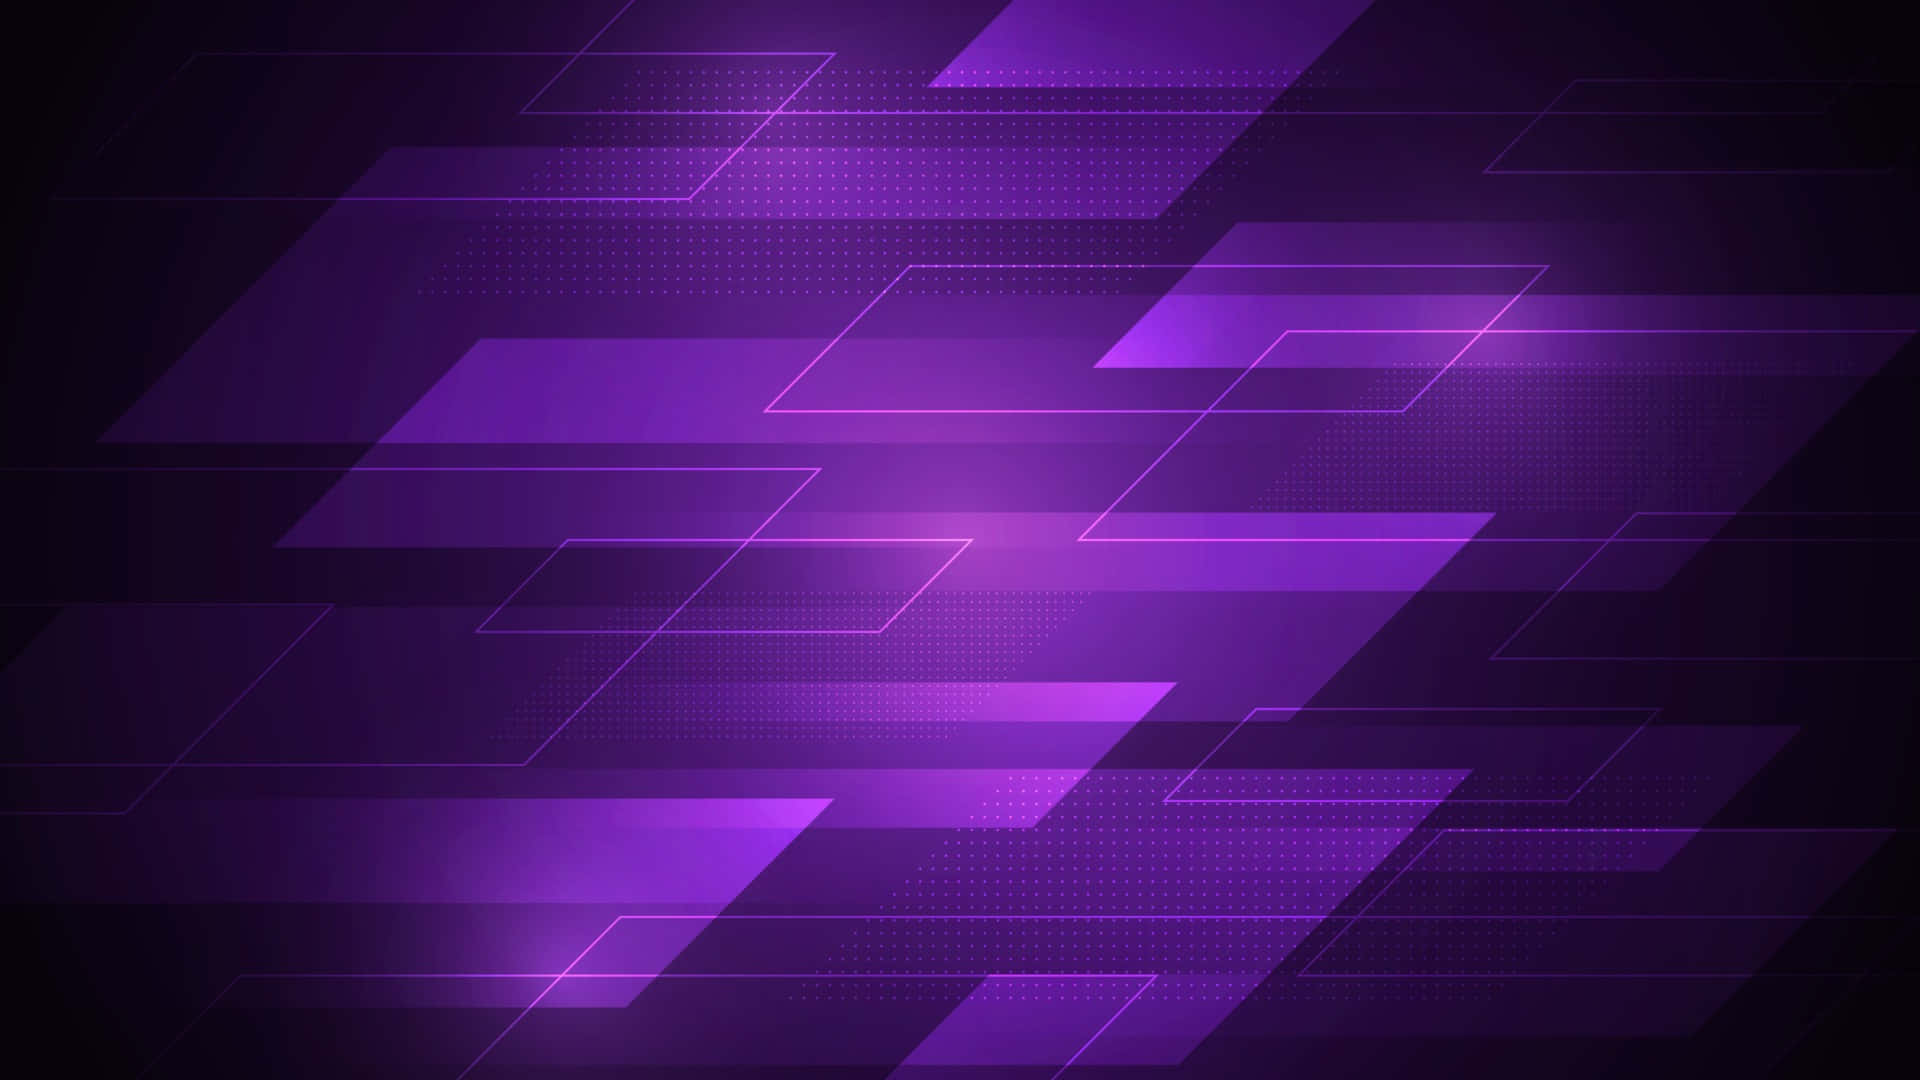 A beautiful and mysterious dark purple background with a calming and reflective atmosphere.